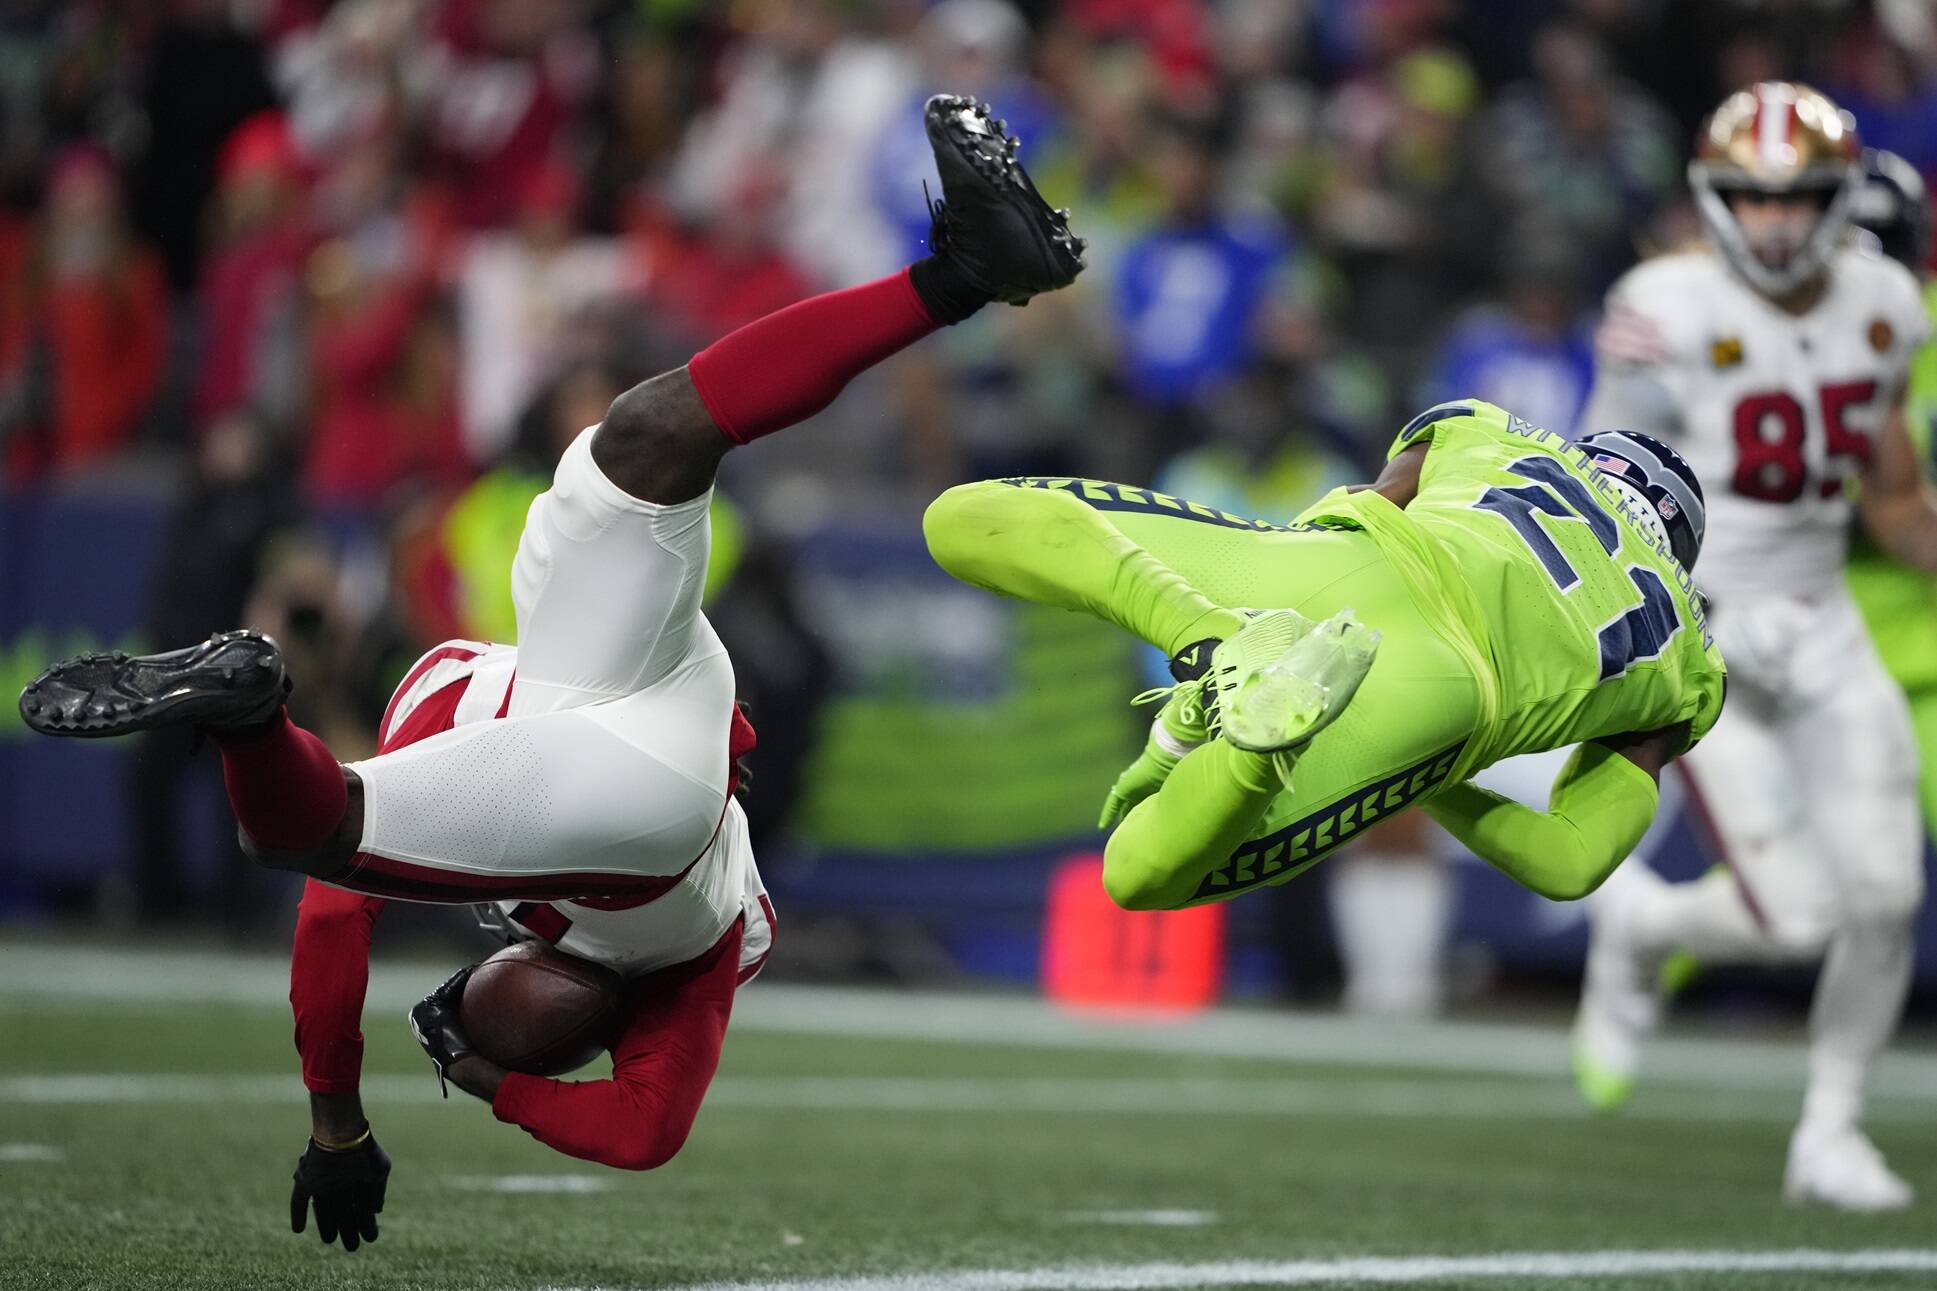 Lindsey Wasson/The Associated Press
San Francisco 49ers wide receiver Brandon Aiyuk, left, defended by Seattle Seahawks cornerback Devon Witherspoon (21) catches a 28-yard pass for a touchdown during the second half Thursday night at Lumen Field in Seattle.